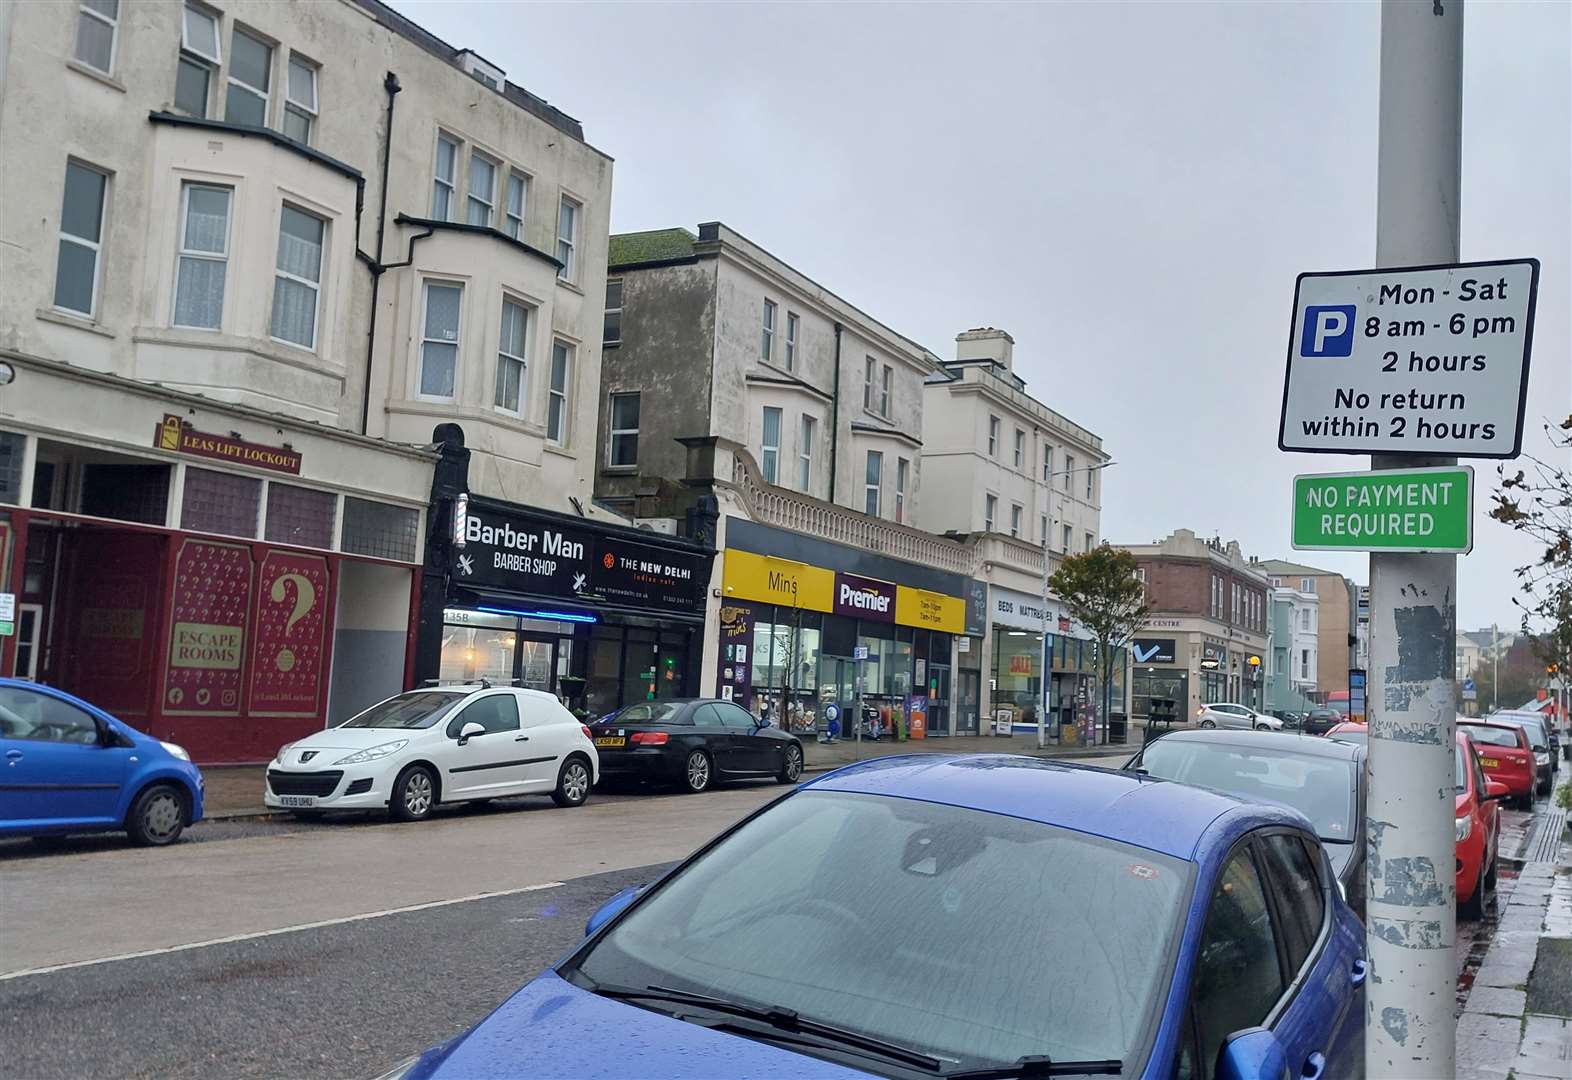 The council hopes introducing pay and display machines in Sandgate Road will reduce congestion